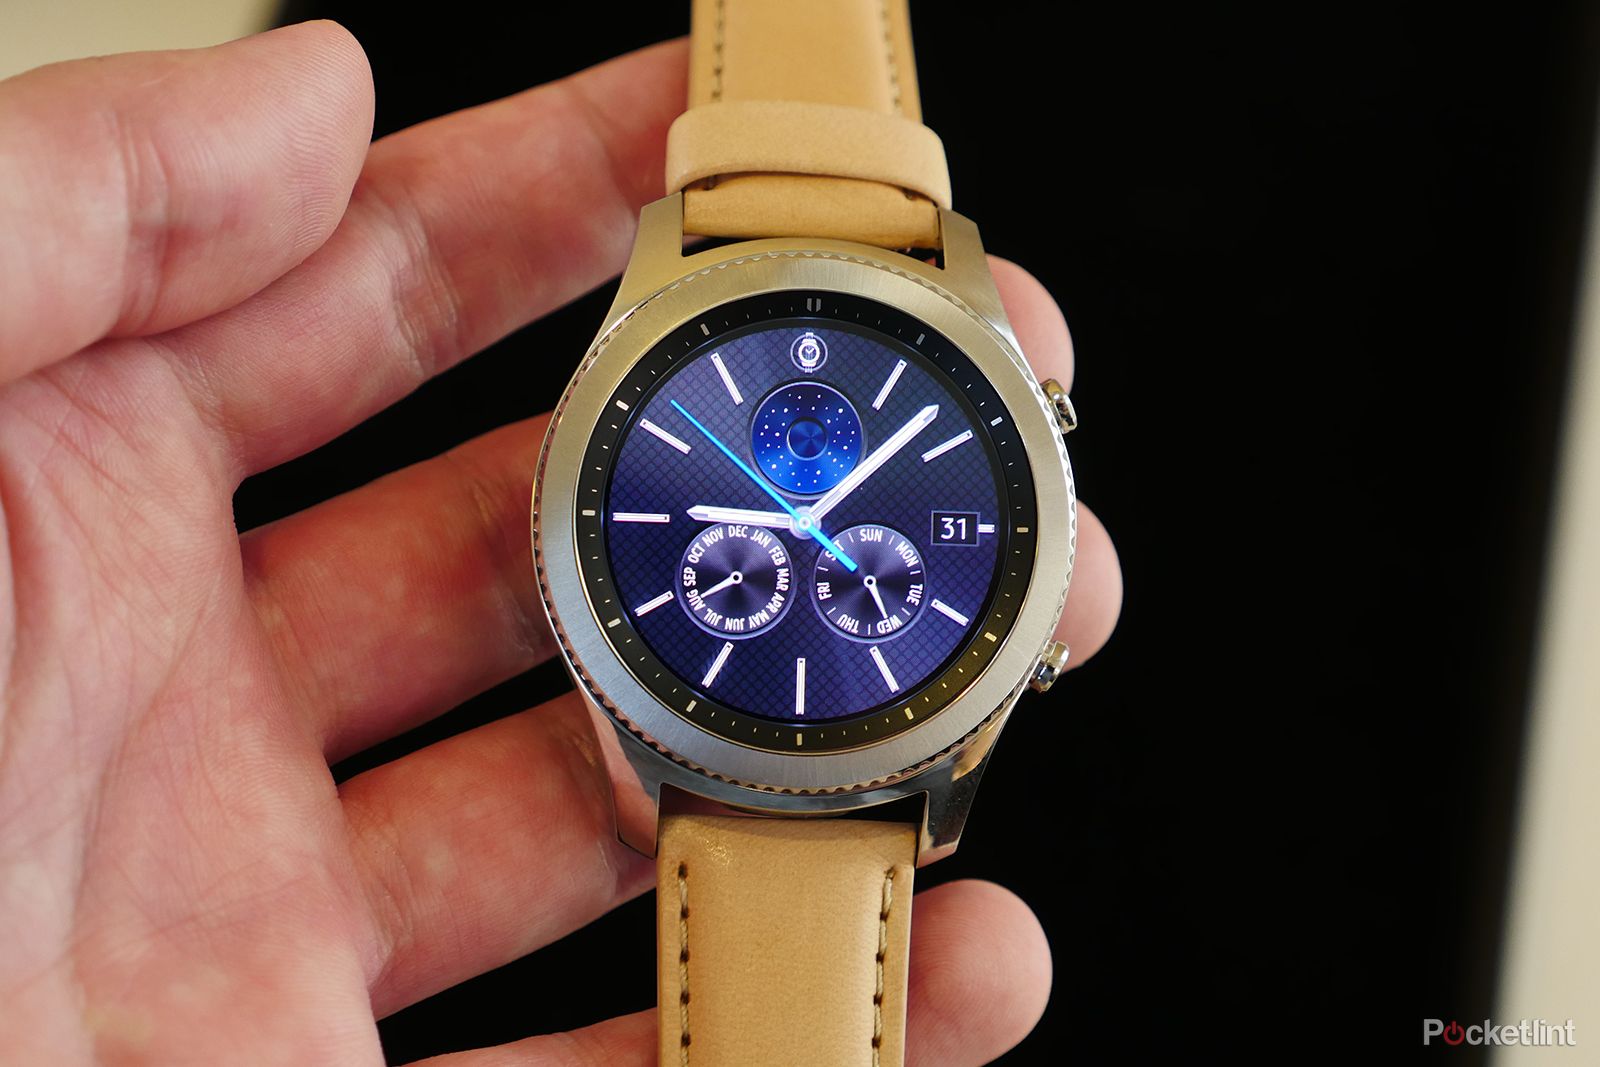 Samsung Galaxy Watch could be Wear OS not Tizen image 1